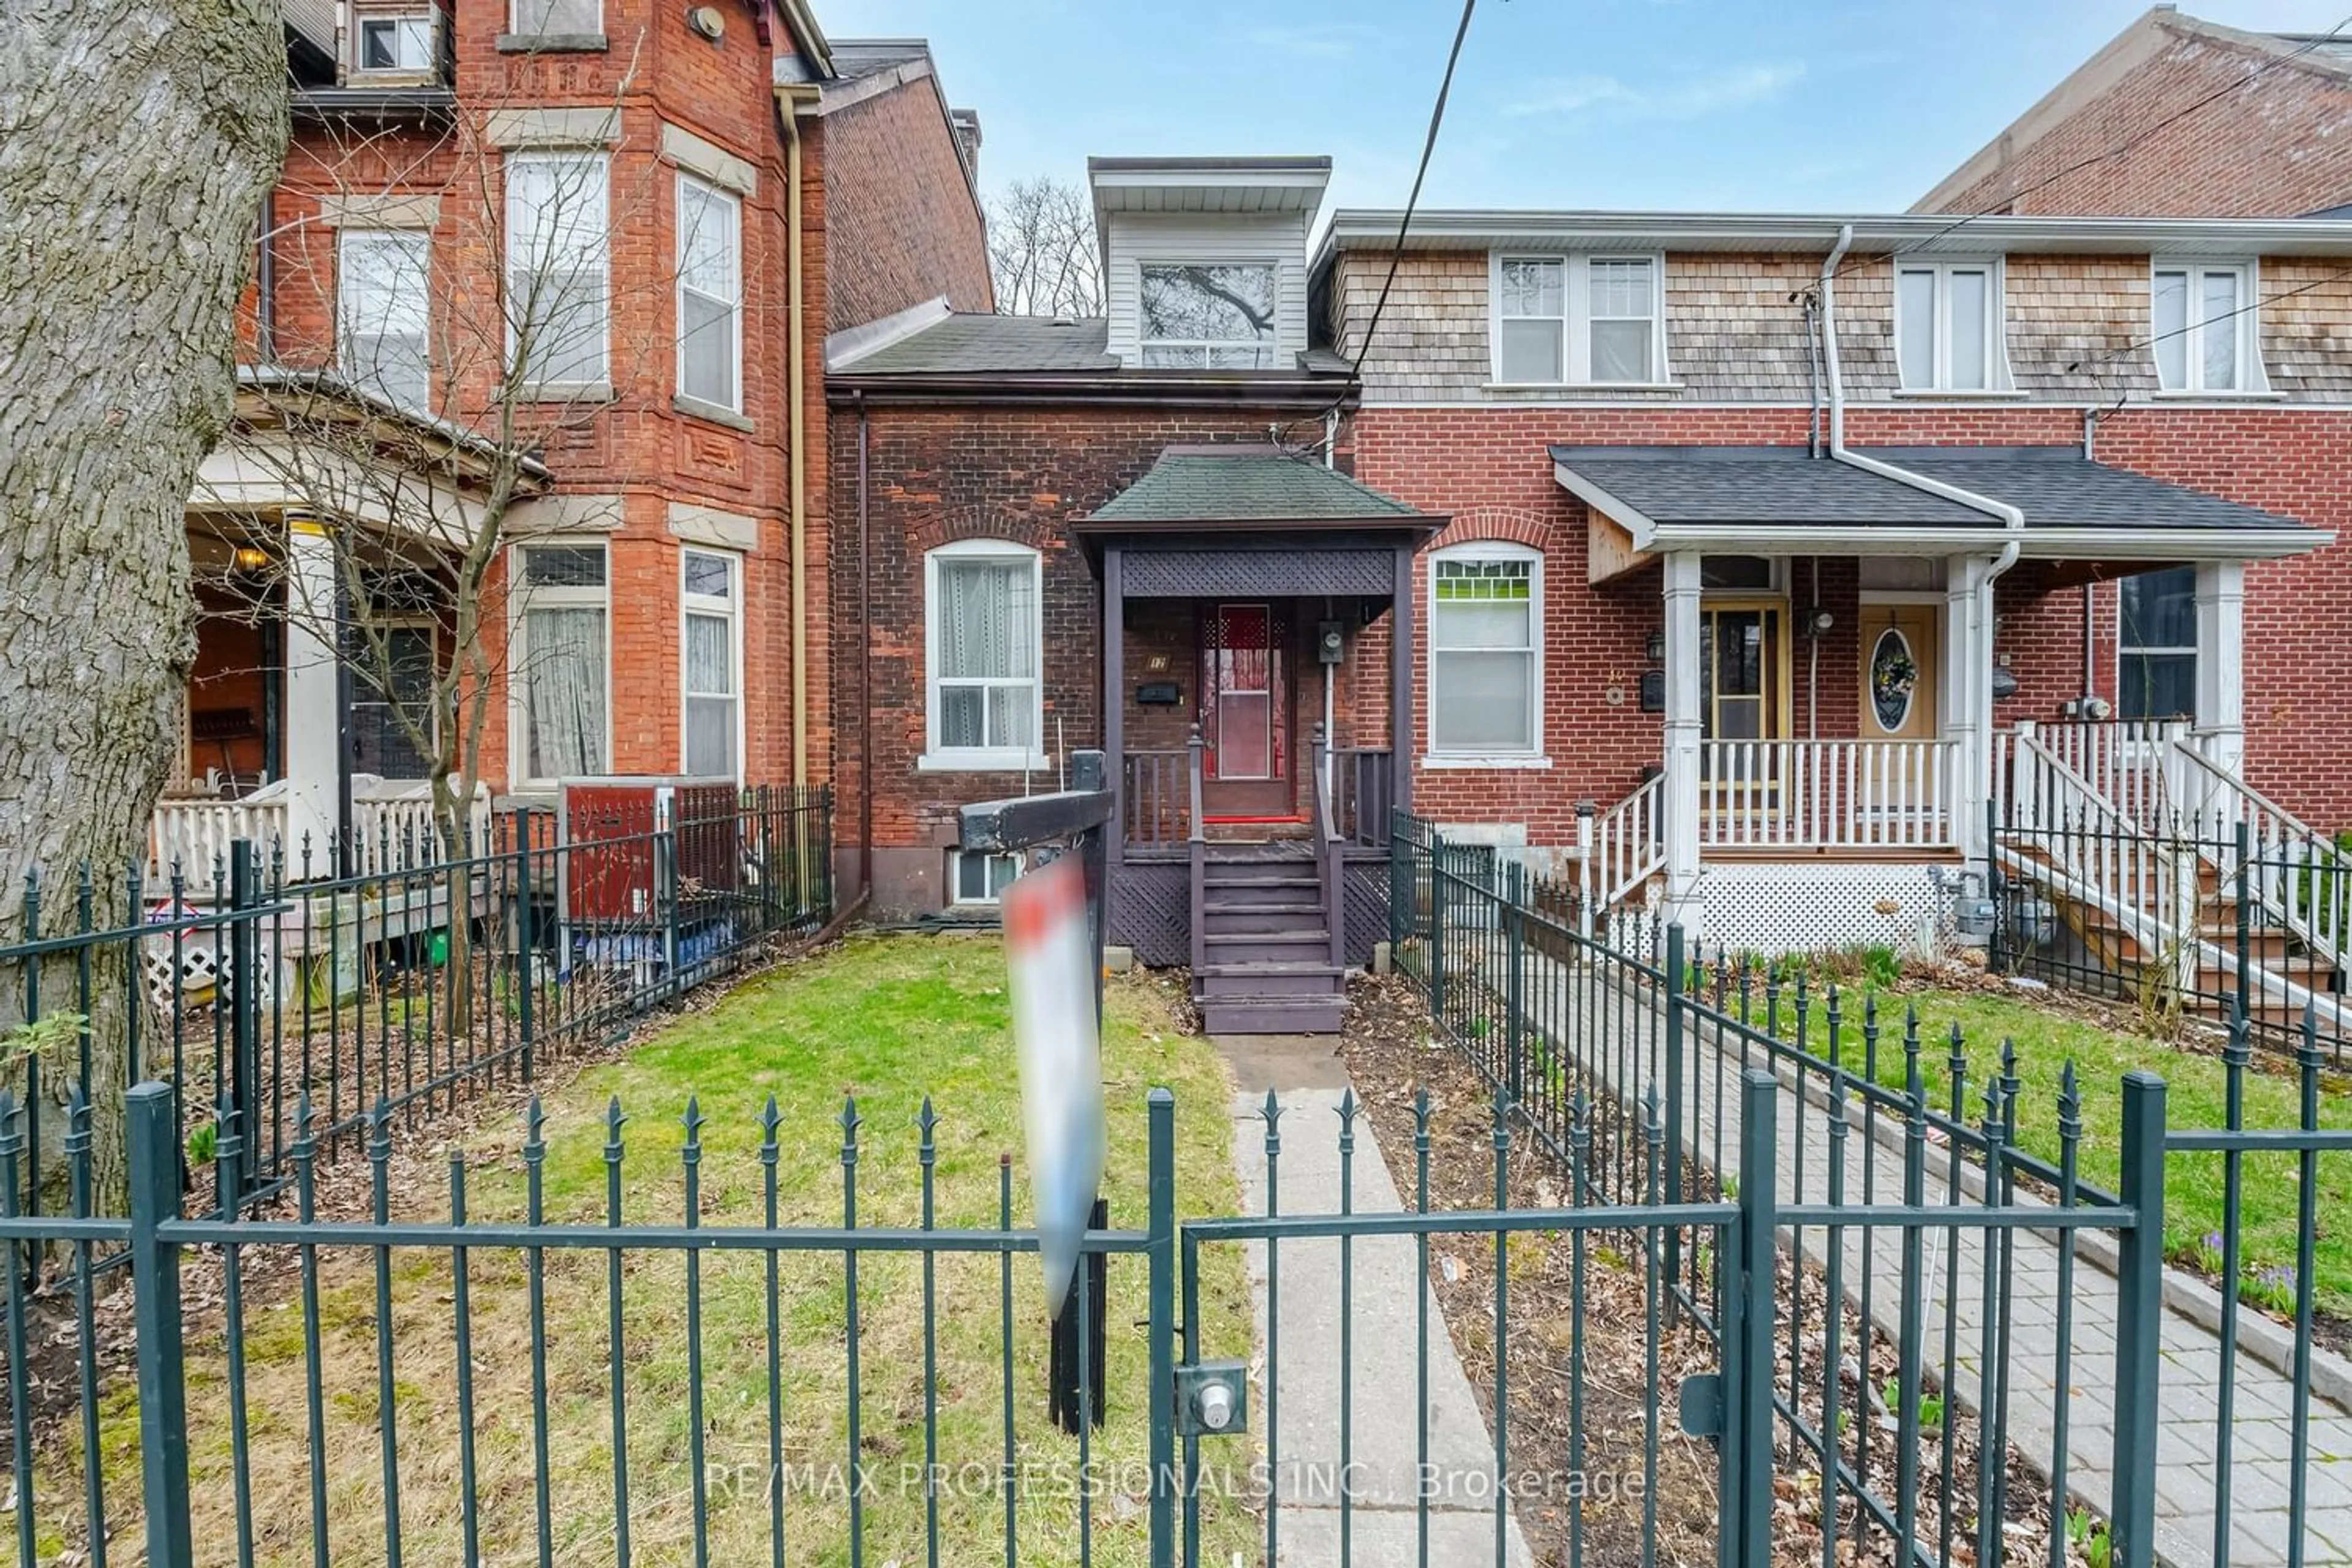 Home with unknown exterior material for 12 O'hara Ave, Toronto Ontario M6K 2P8